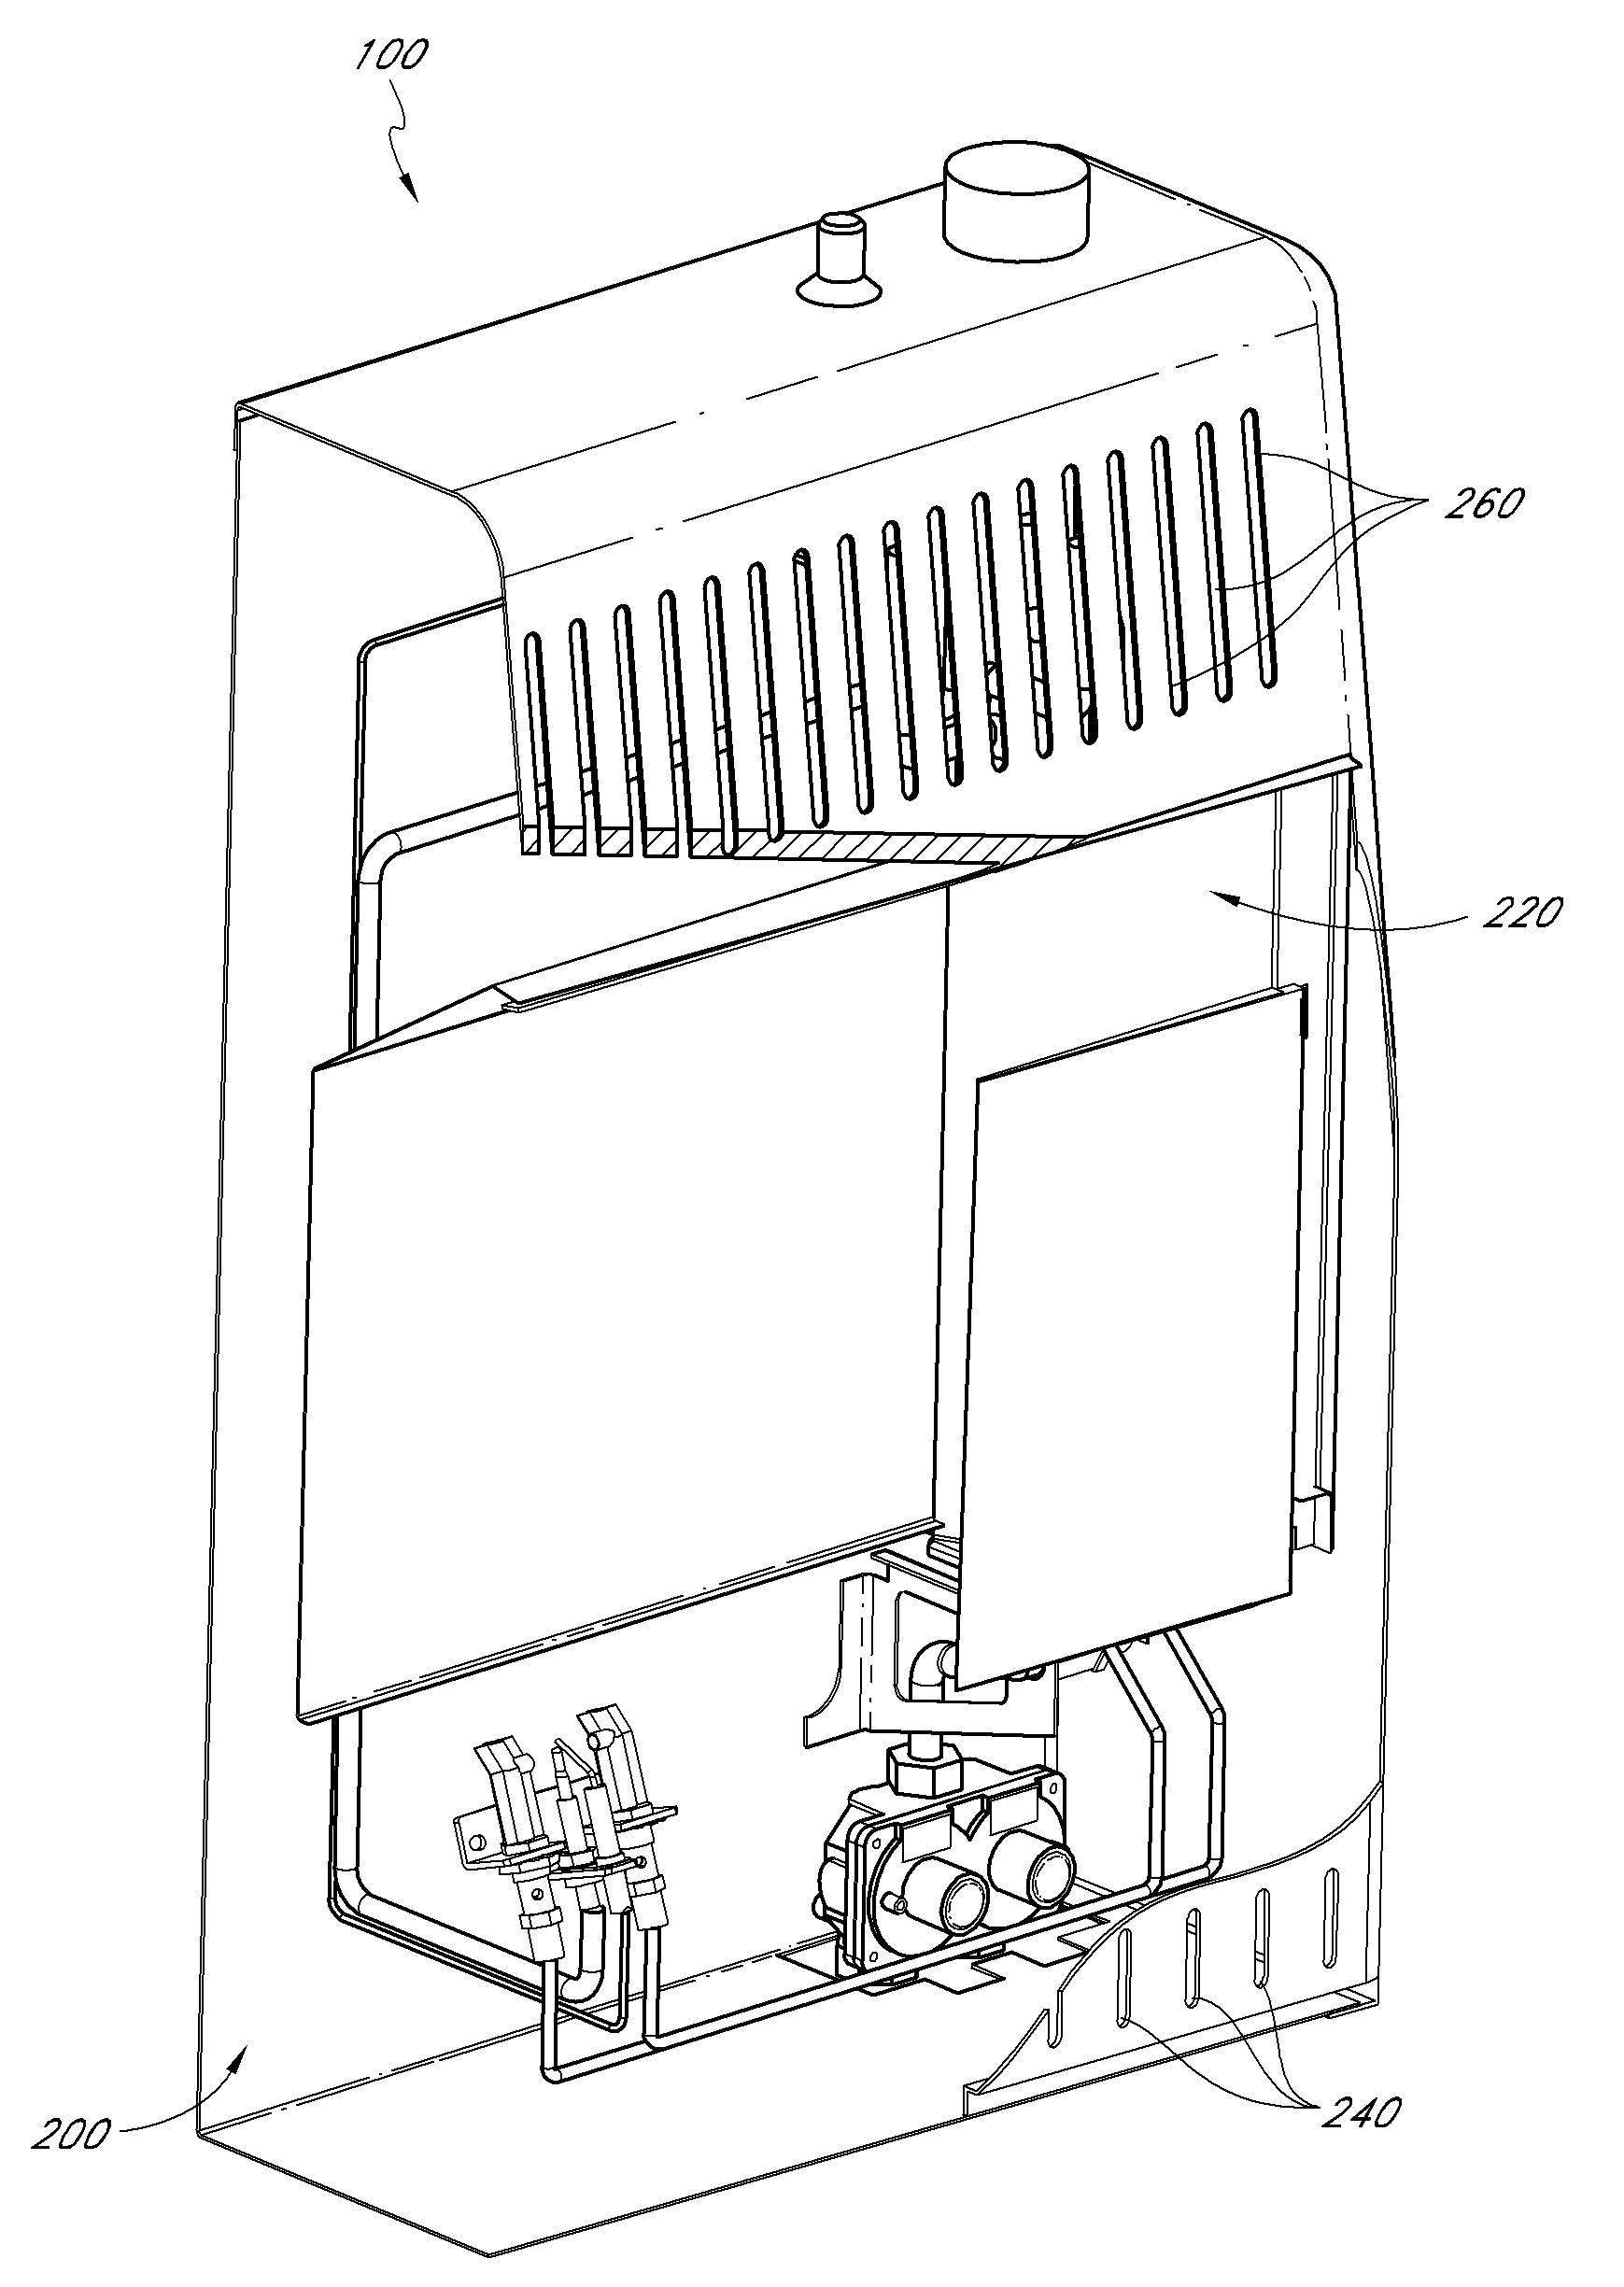 Dual fuel heating system and air shutter